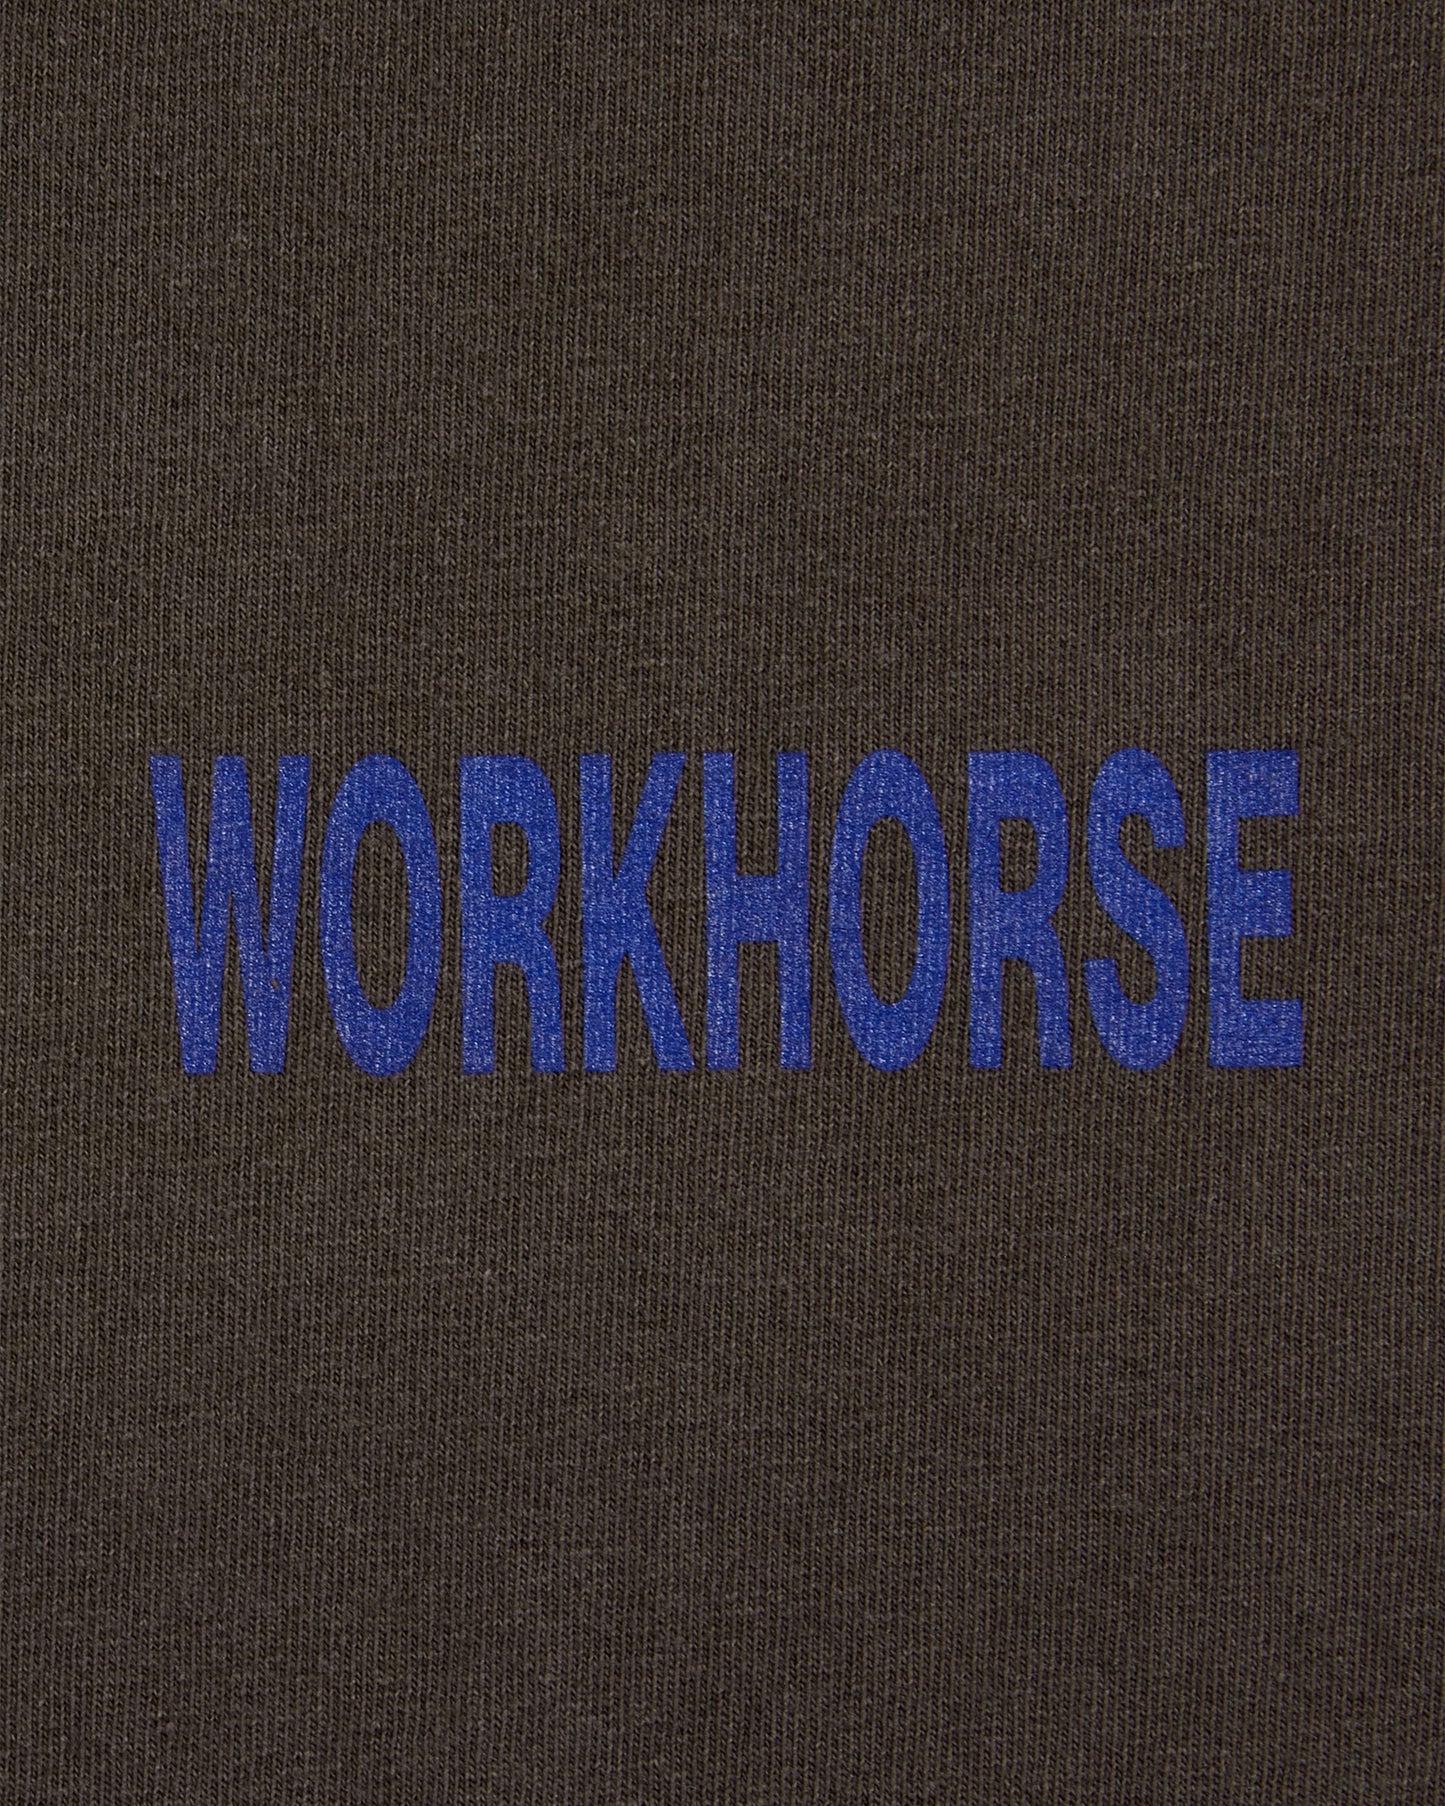 Play At Work - T-Shirt Pack